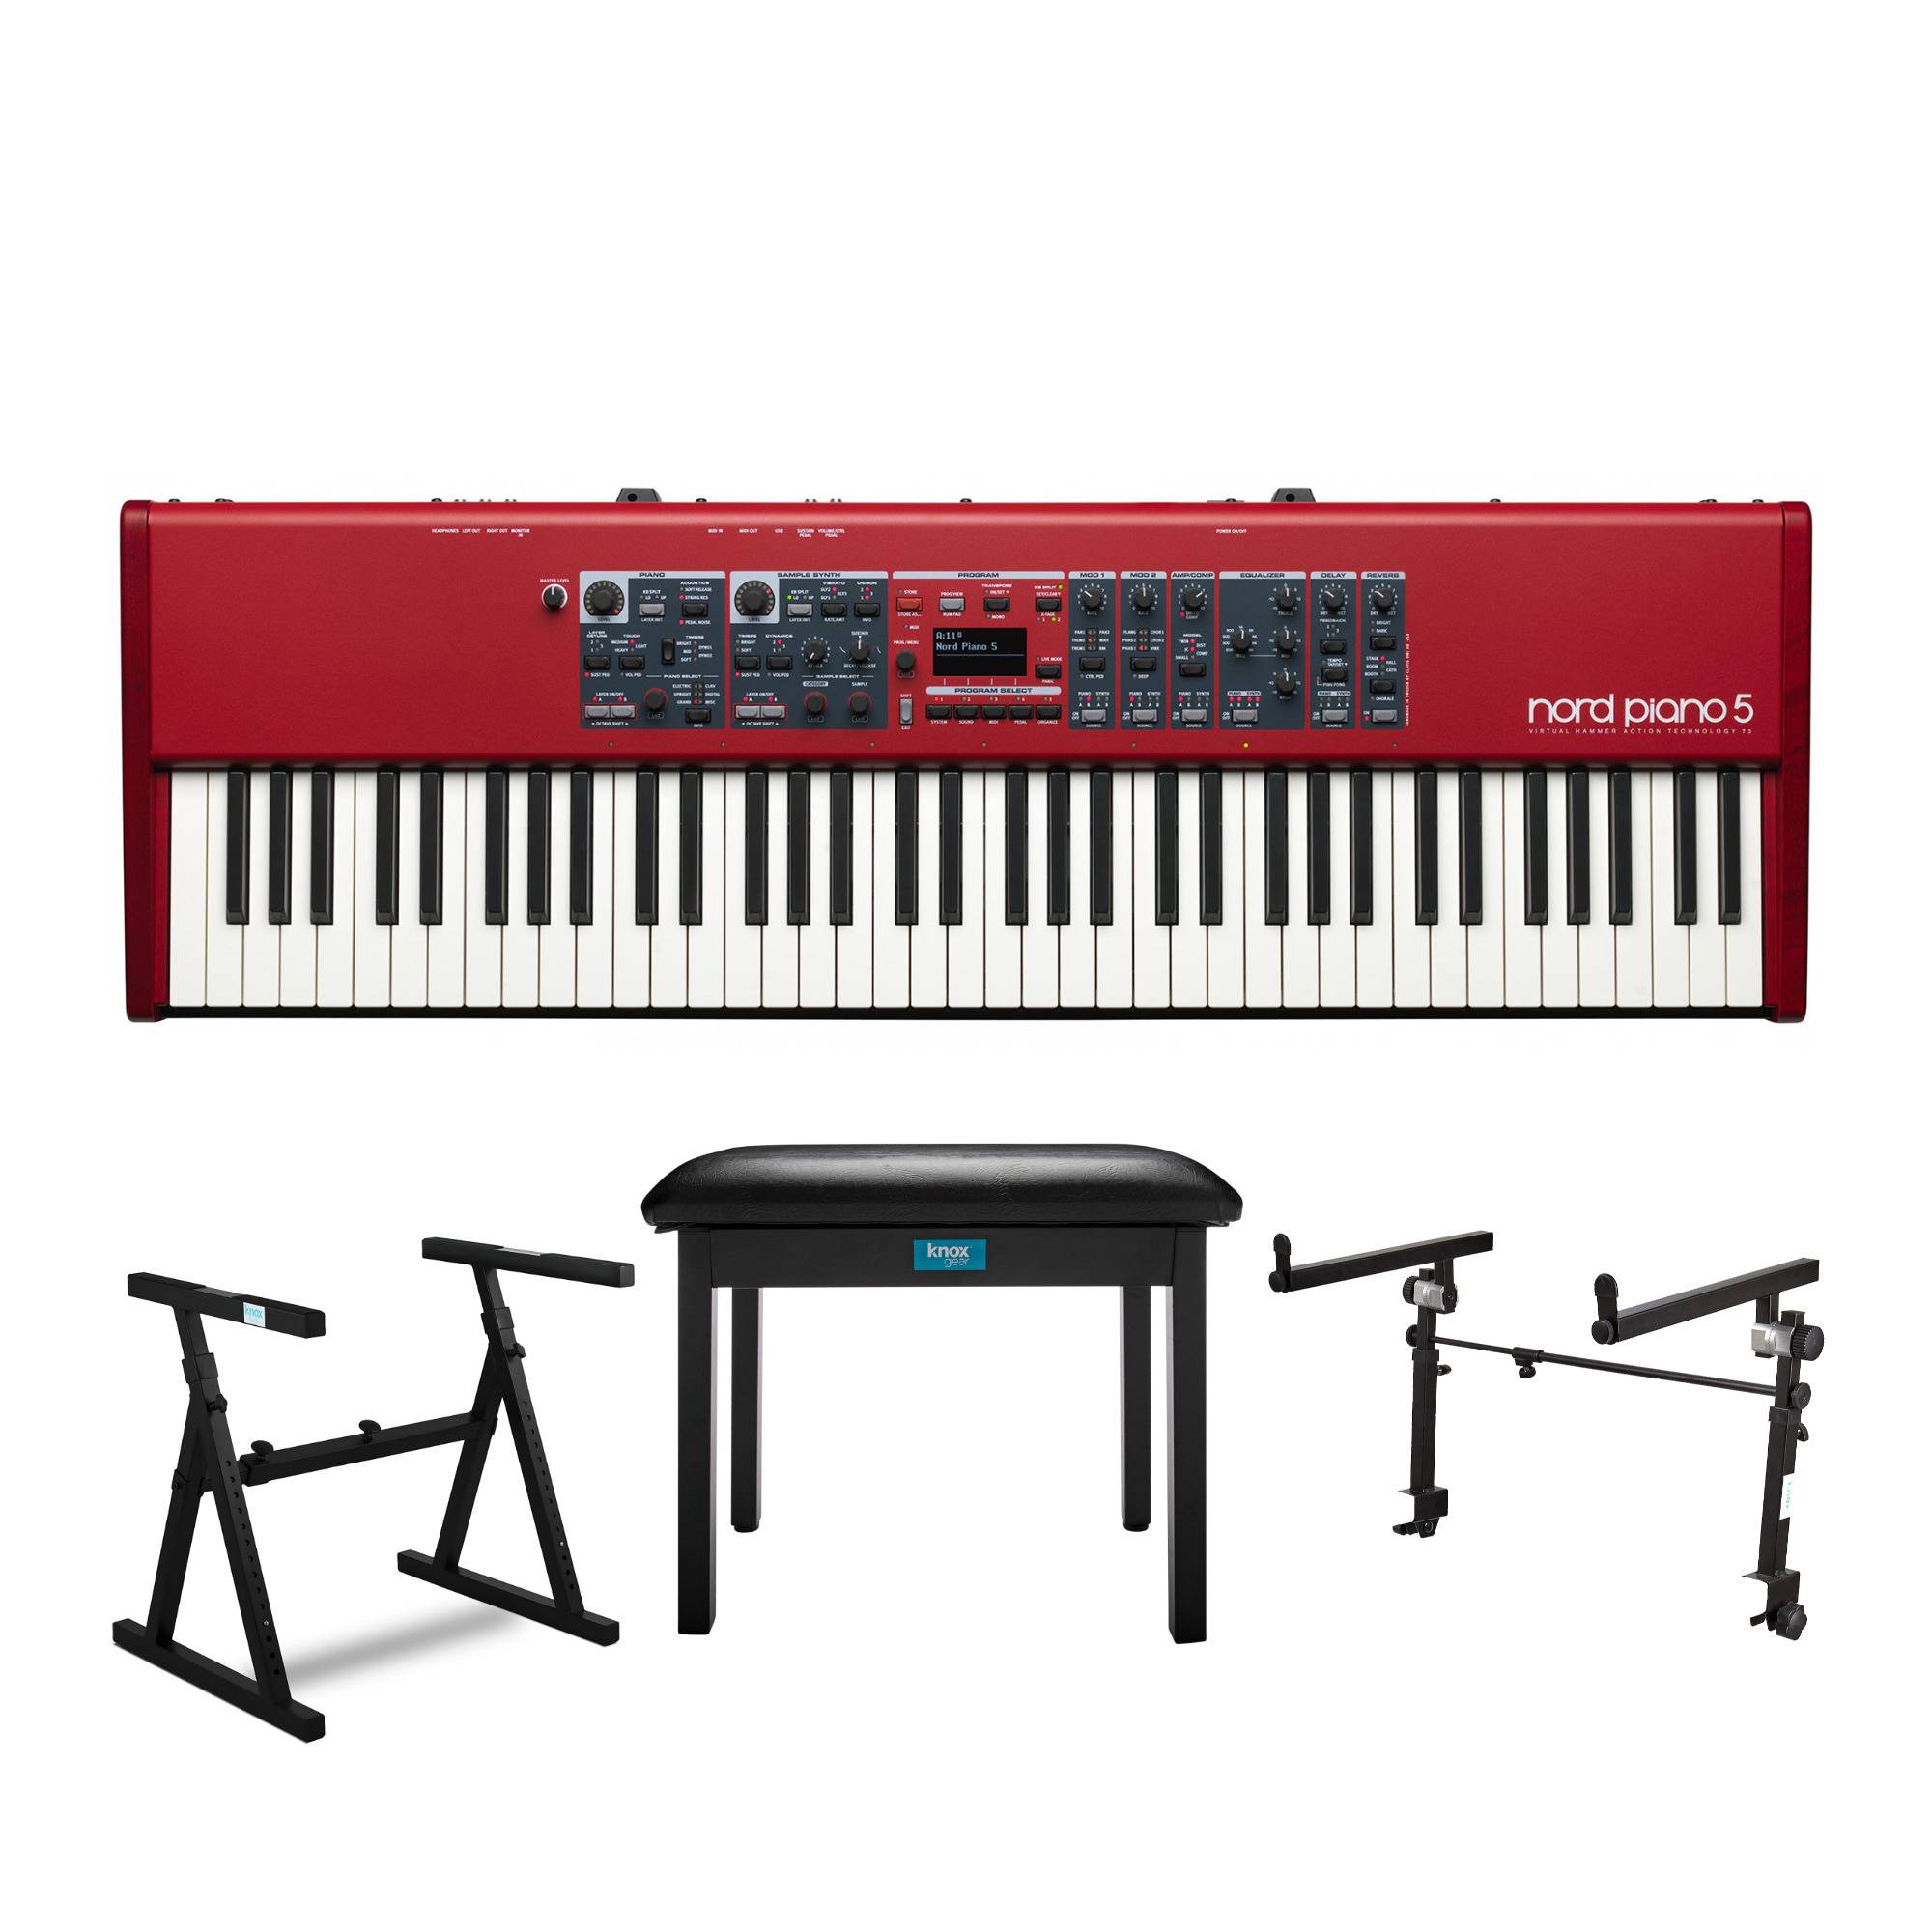 Nord Piano 5 73-Key Digital Piano with Two-Tier Adjustable Stand and Flip-Top Adjustable Bench